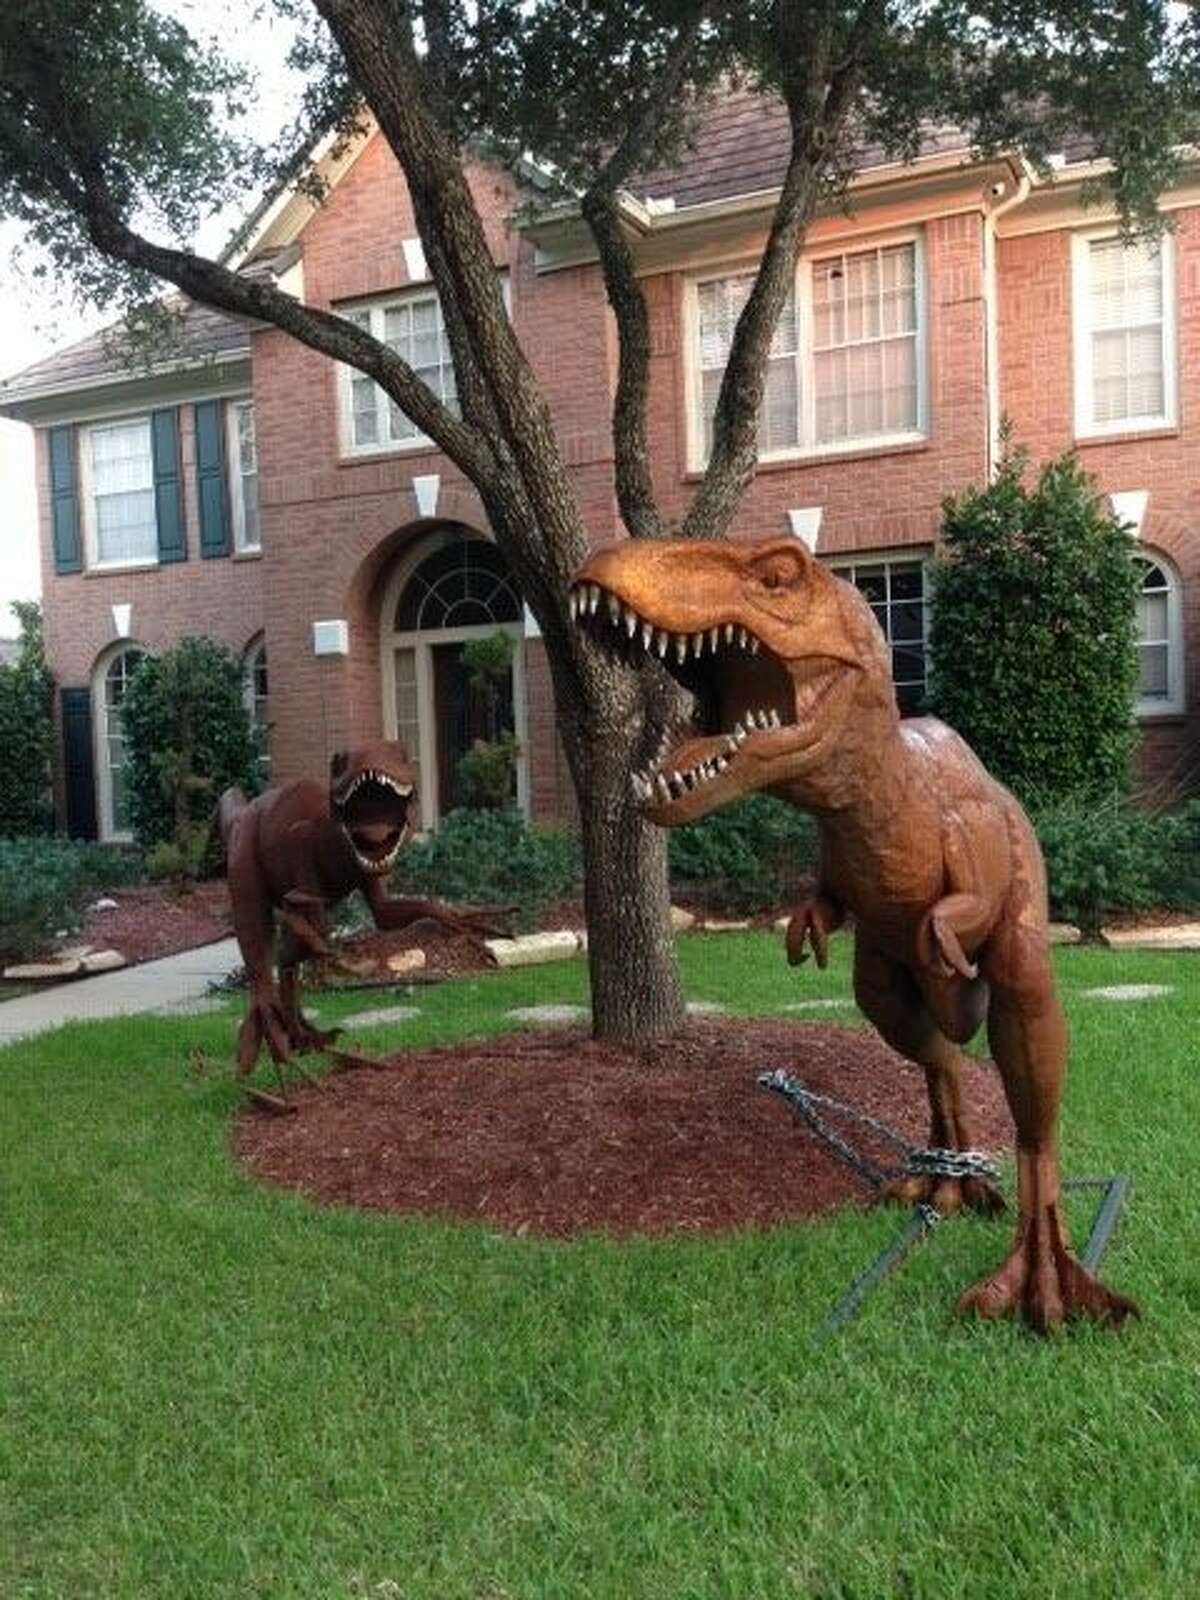 A Sugar Land woman, Nancy Hentschel, who has been told to remove two hulking dinosaur replicas from her front yard said the fearsome figures will go.